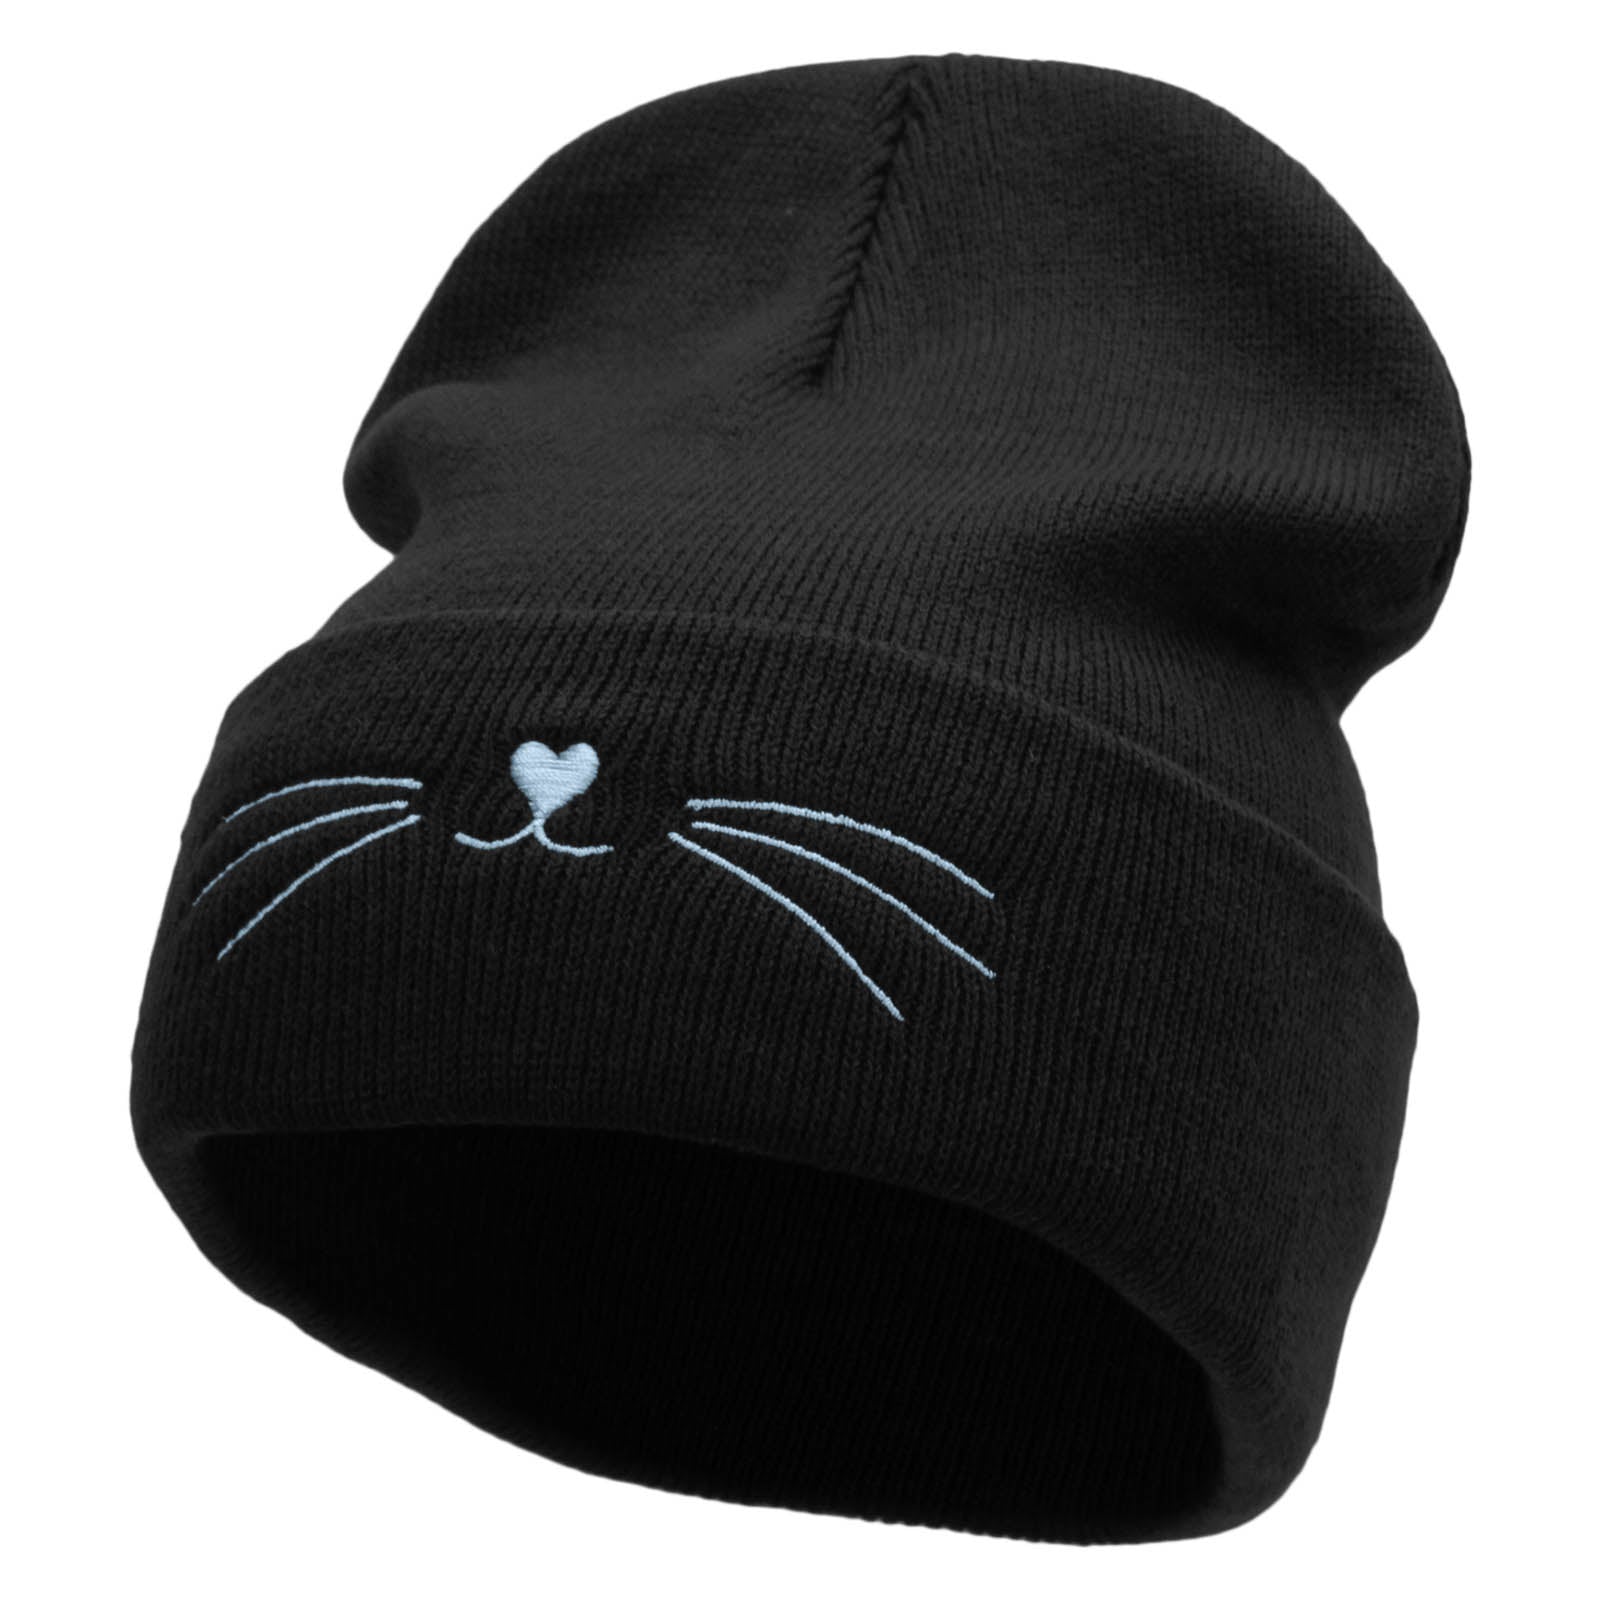 Kitty Cat Embroidered 12 Inch Long Knitted Beanie - Black OSFM